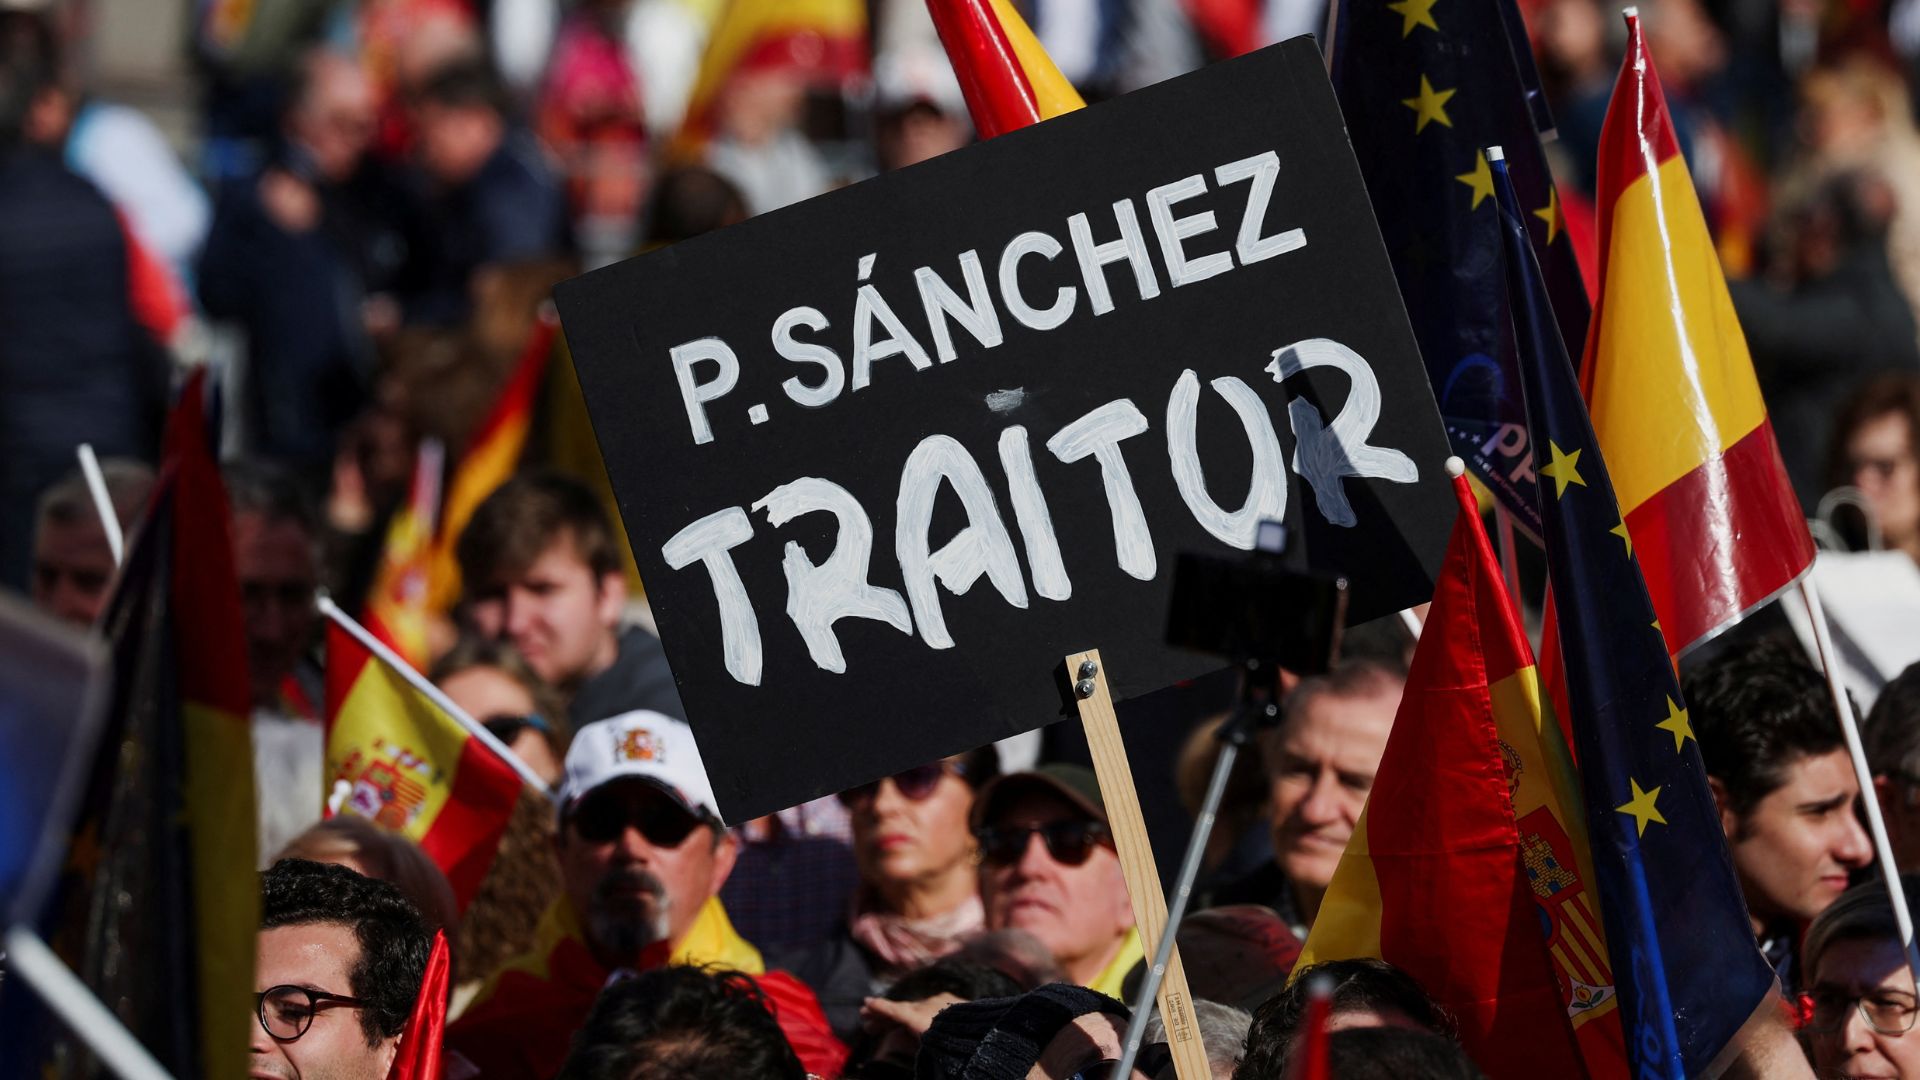 A protester holds a placard that calls Pedro Sanchez a 'traitor' during a demonstration in Madrid, Spain on Sunday. /Isabel Infantes/Reuters